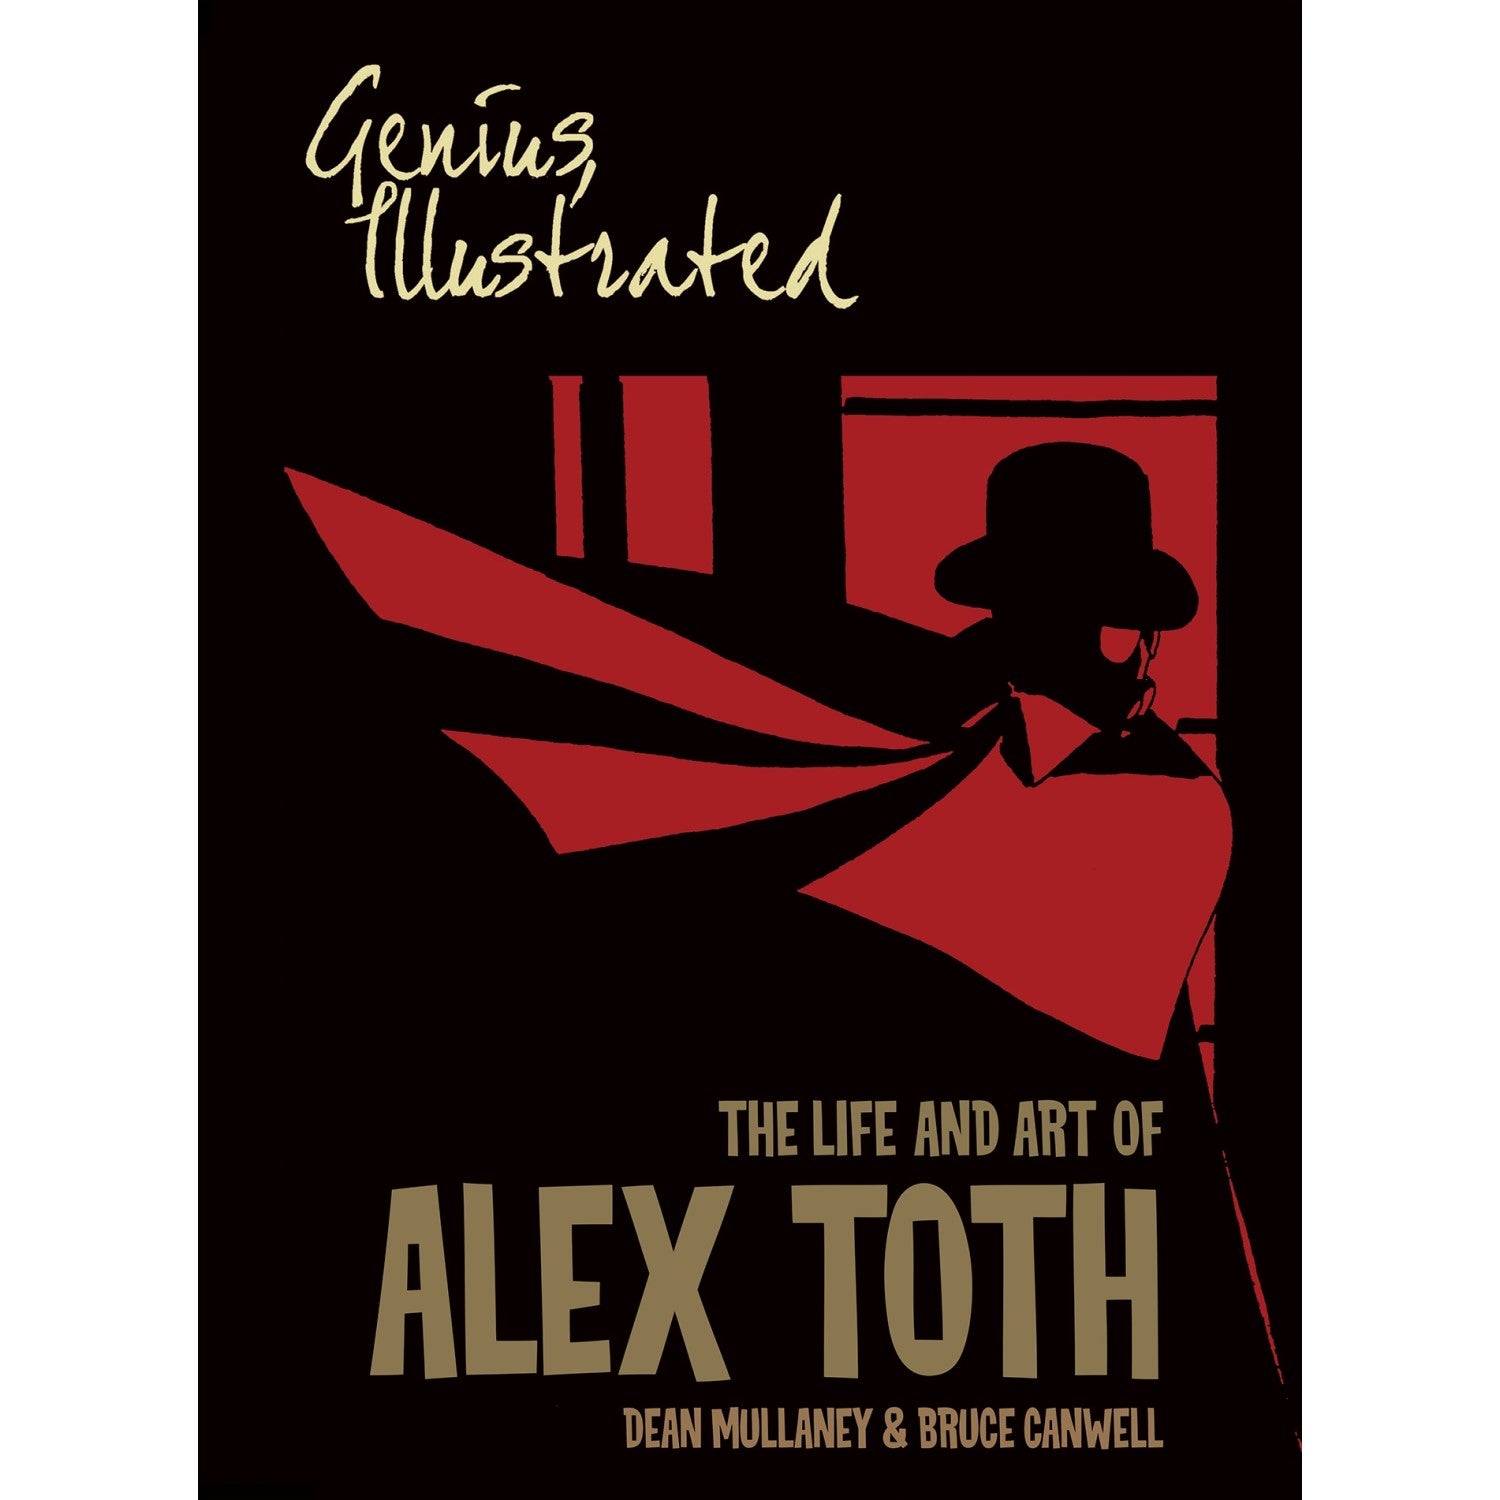 Genius; Illustrated The Life and Art of Alex Toth (Paperback)